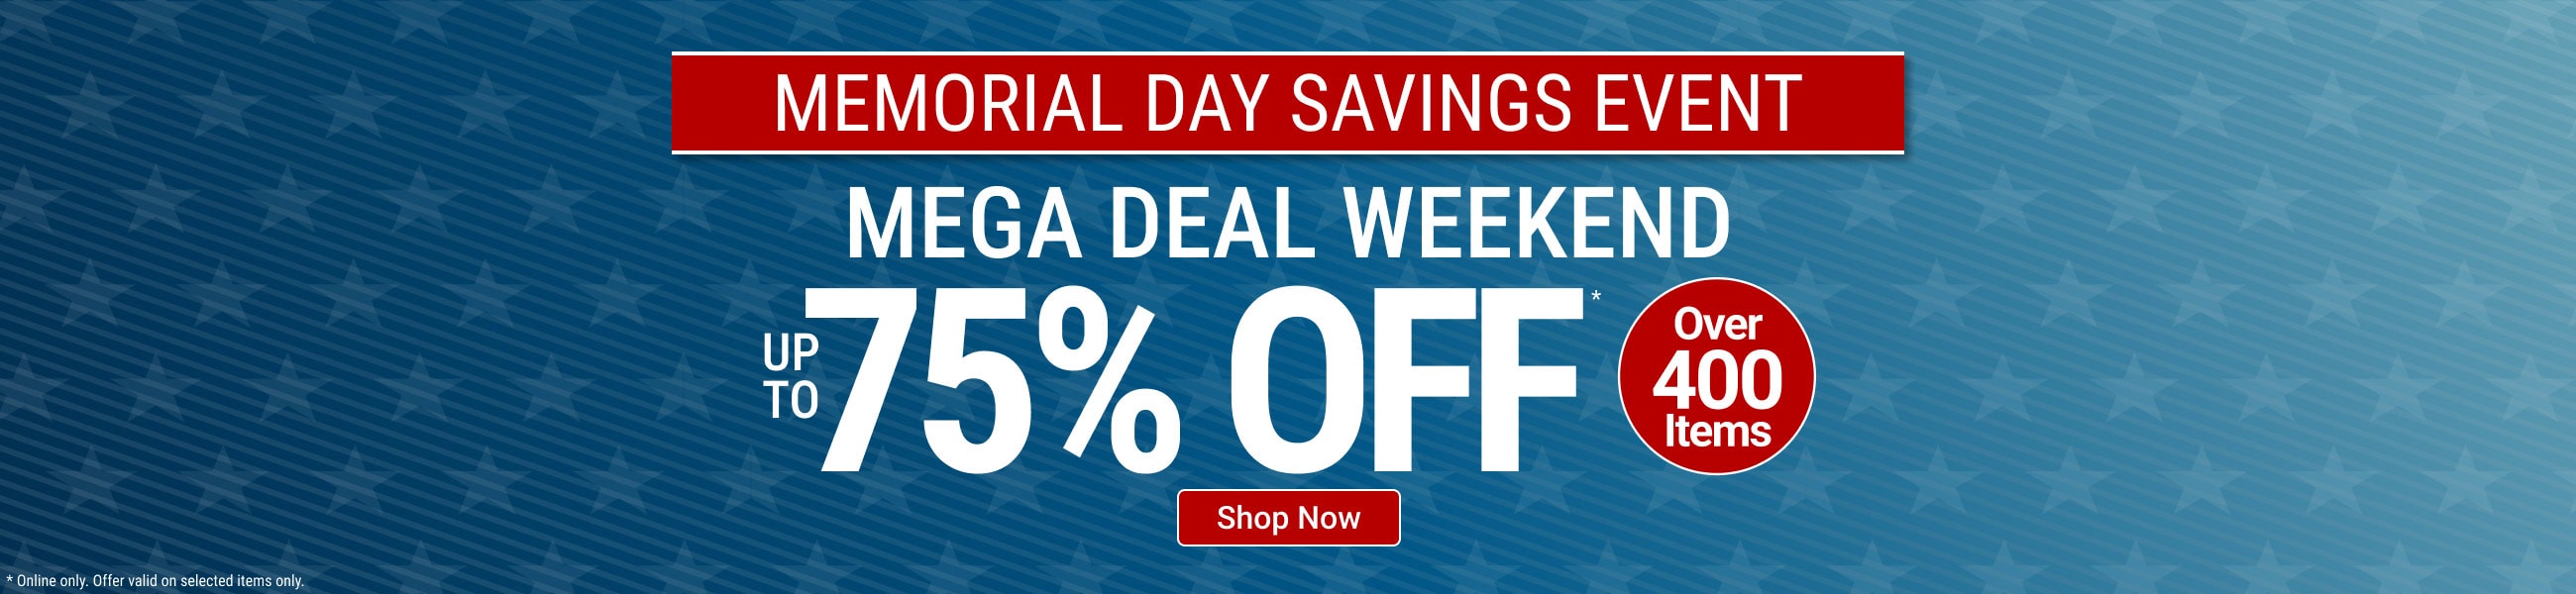 Memorial day savings event up to 75% off - shop now